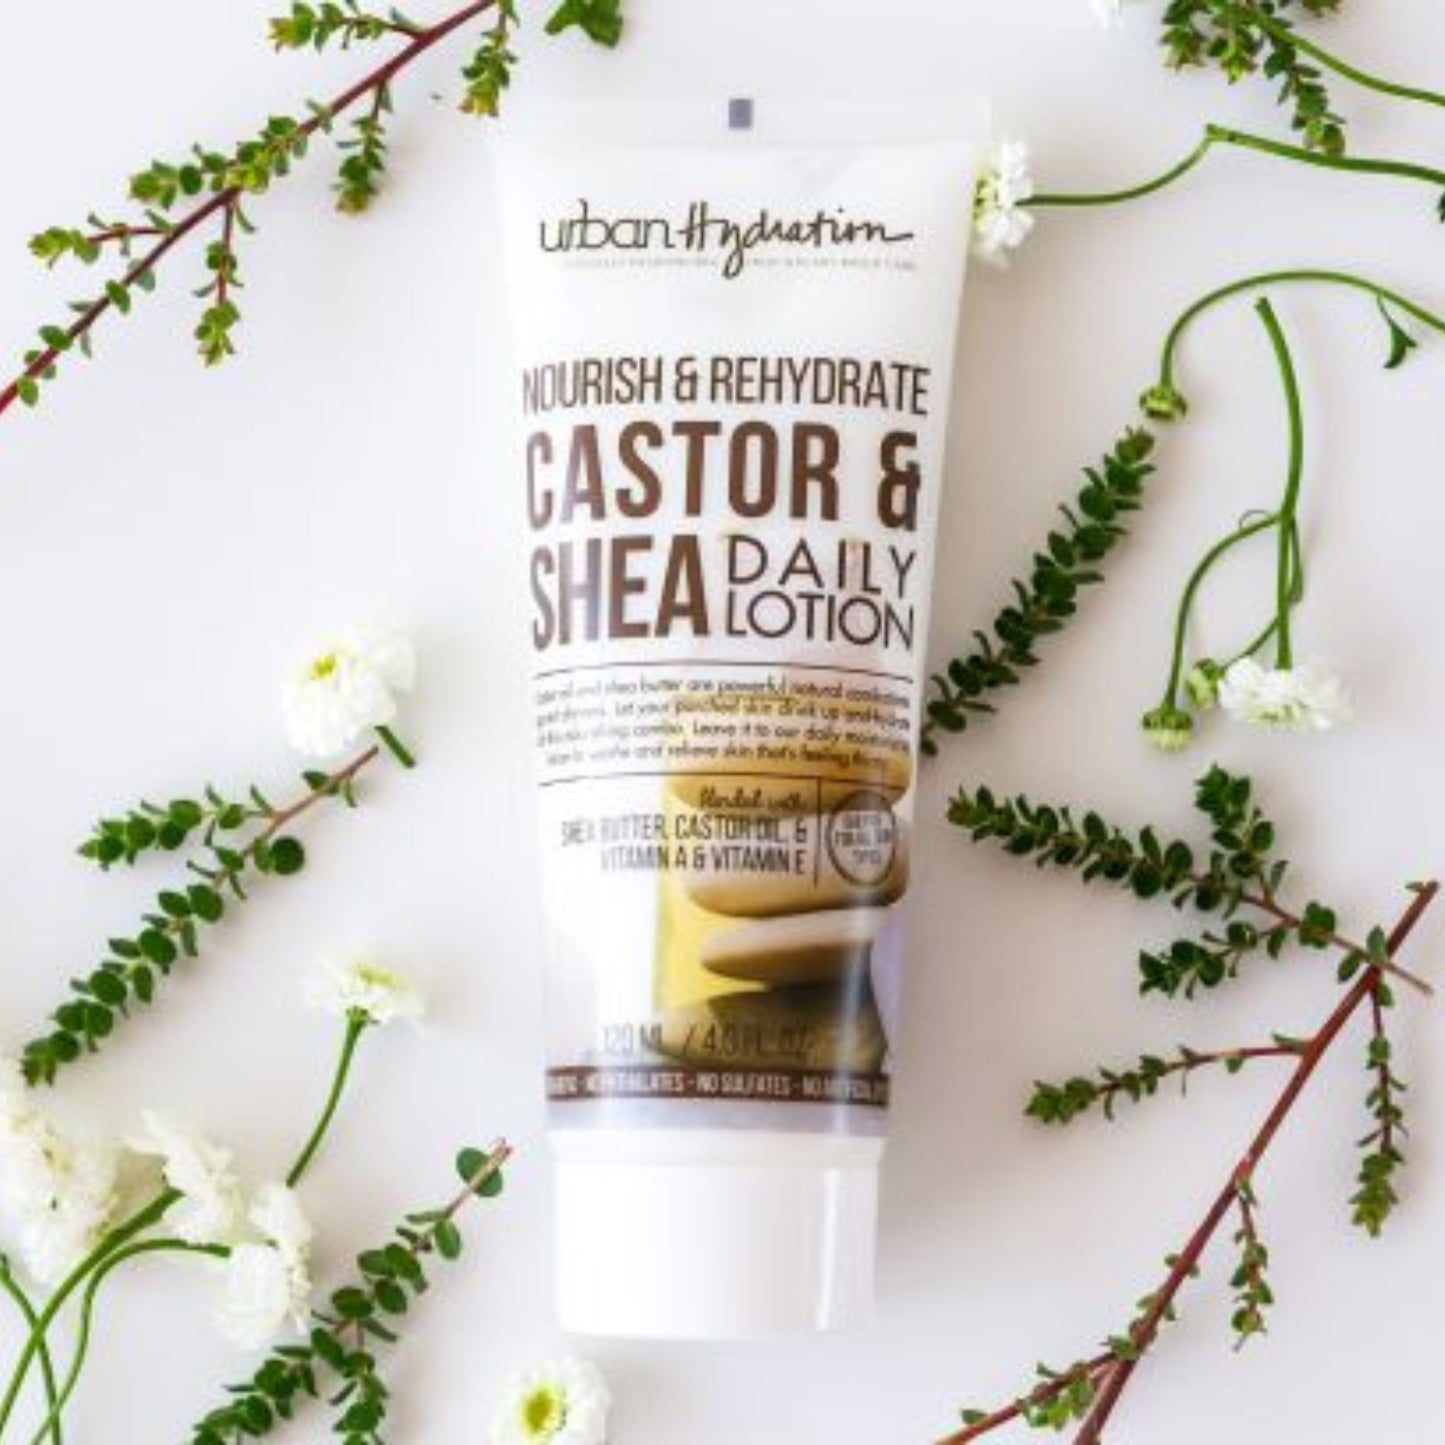 Nourish & Rehydrate Castor & Shea Daily Face Lotion Lifestyle